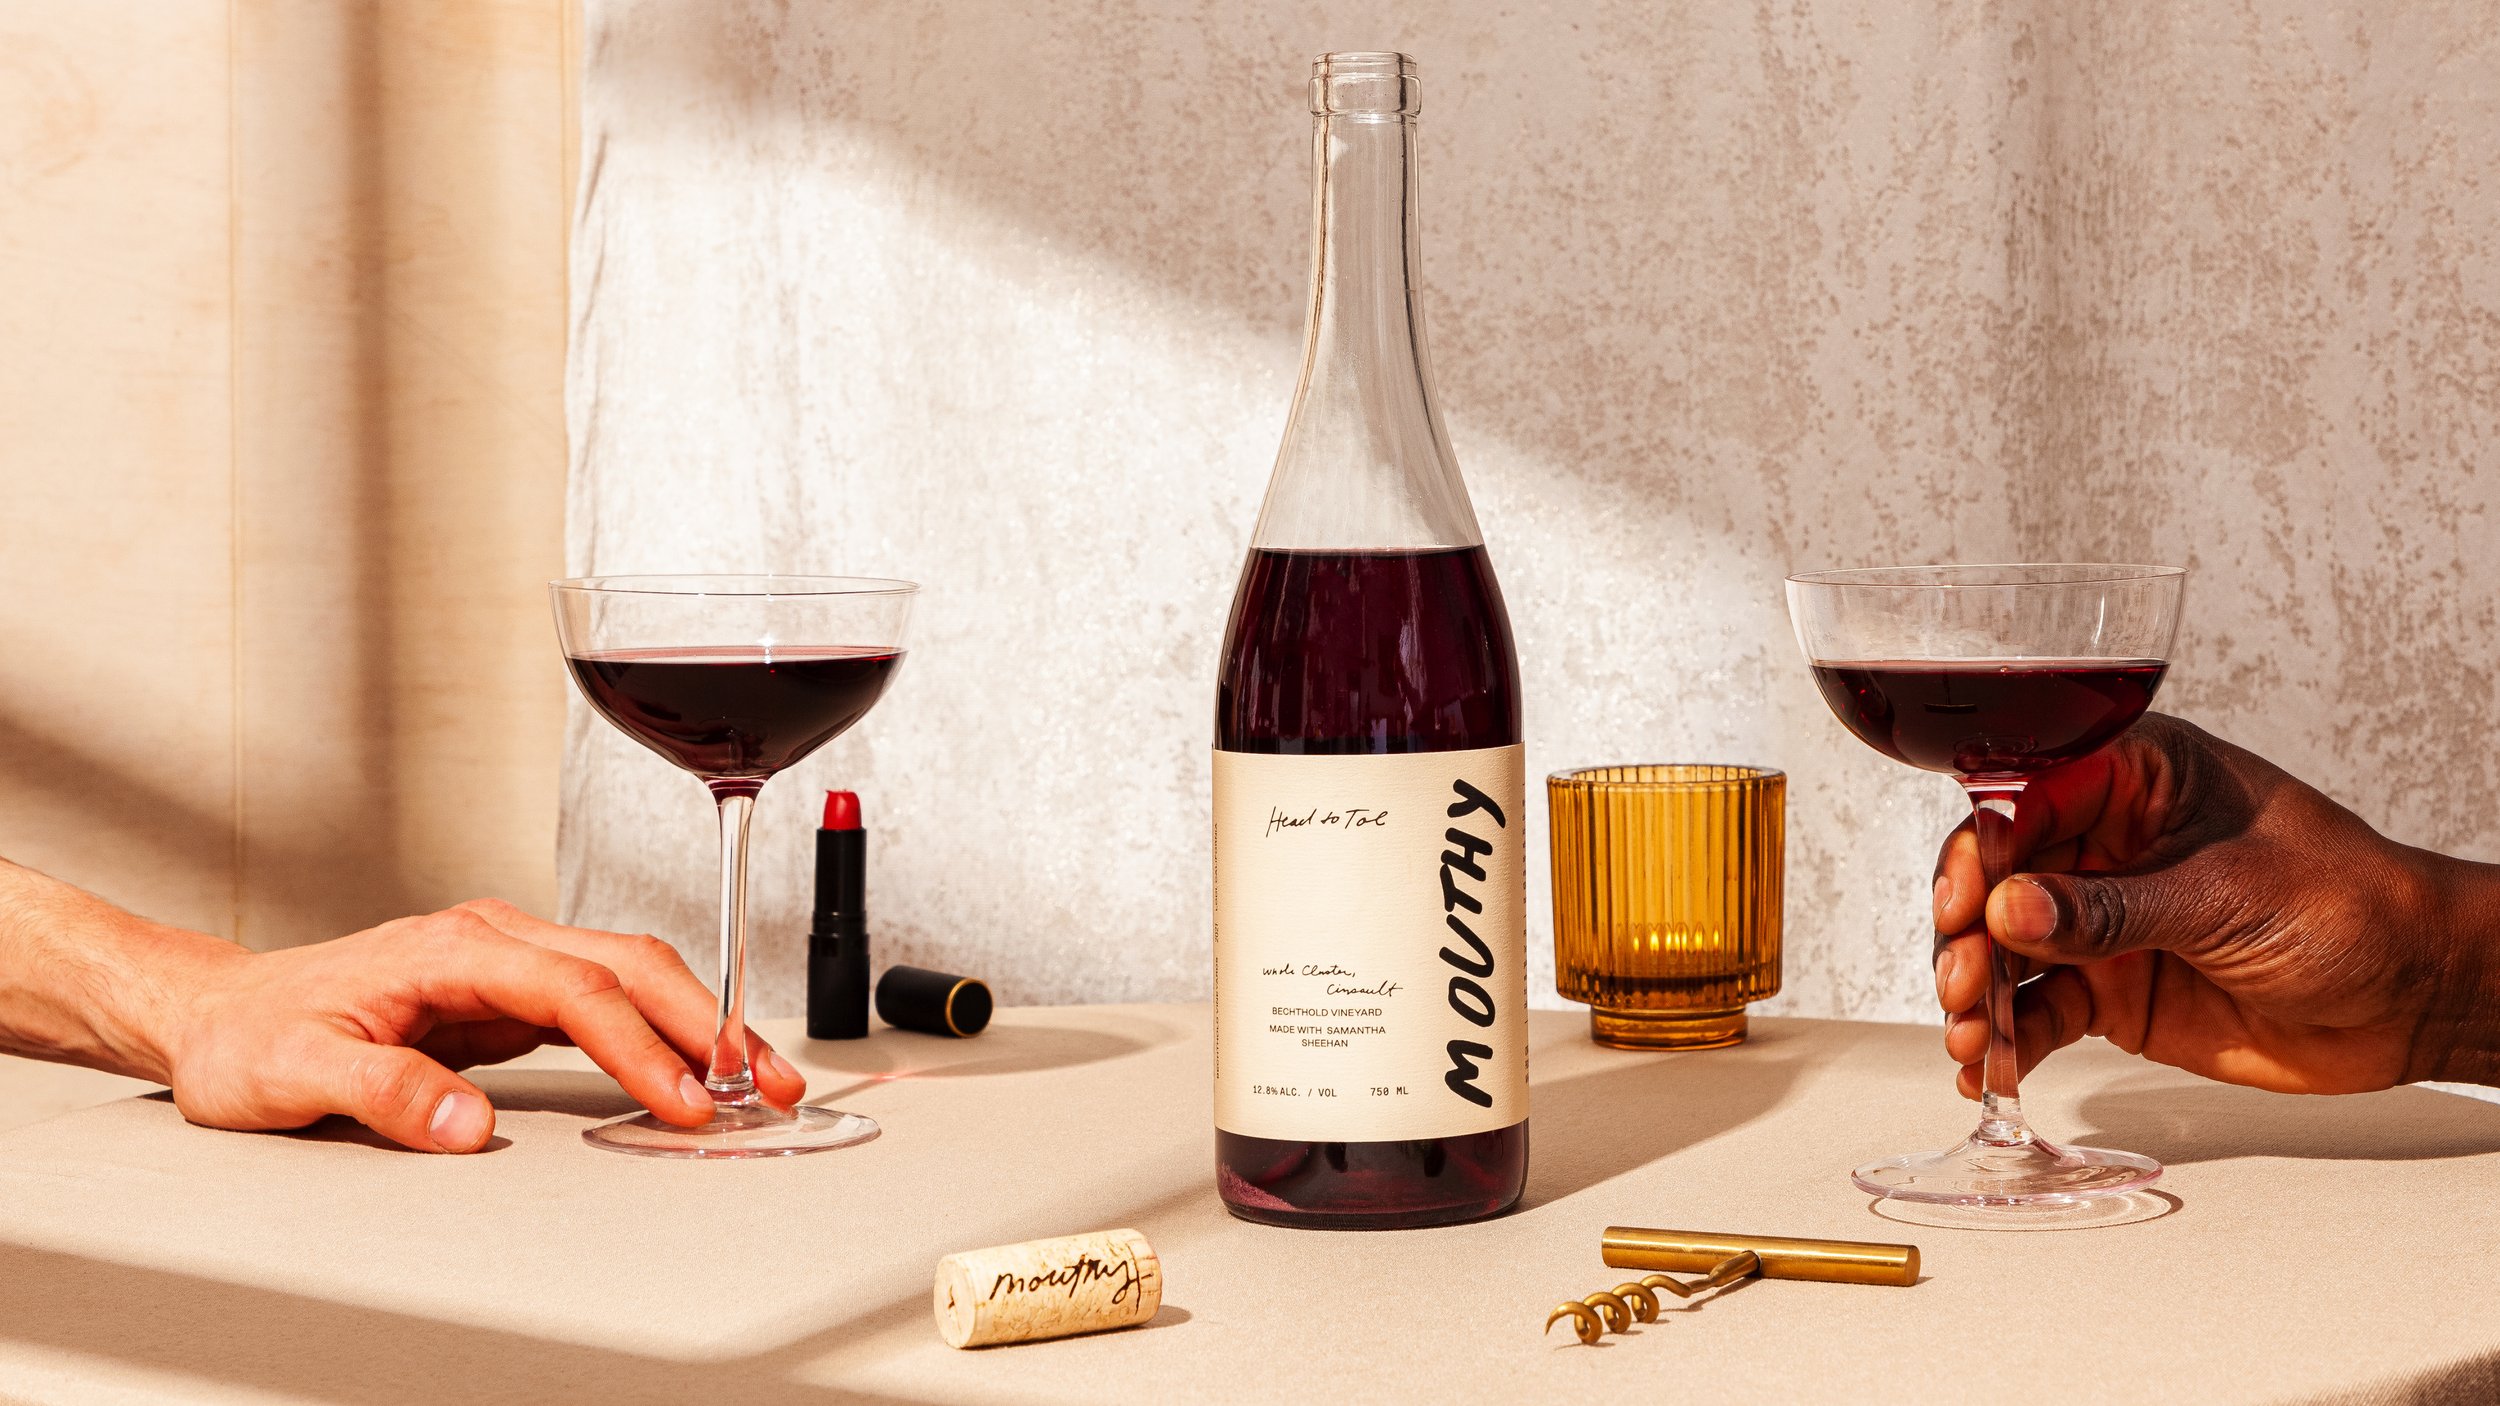  Mouthy Wines, Head to Toe, Foxtrot Market (Branding &amp; Packaging) 